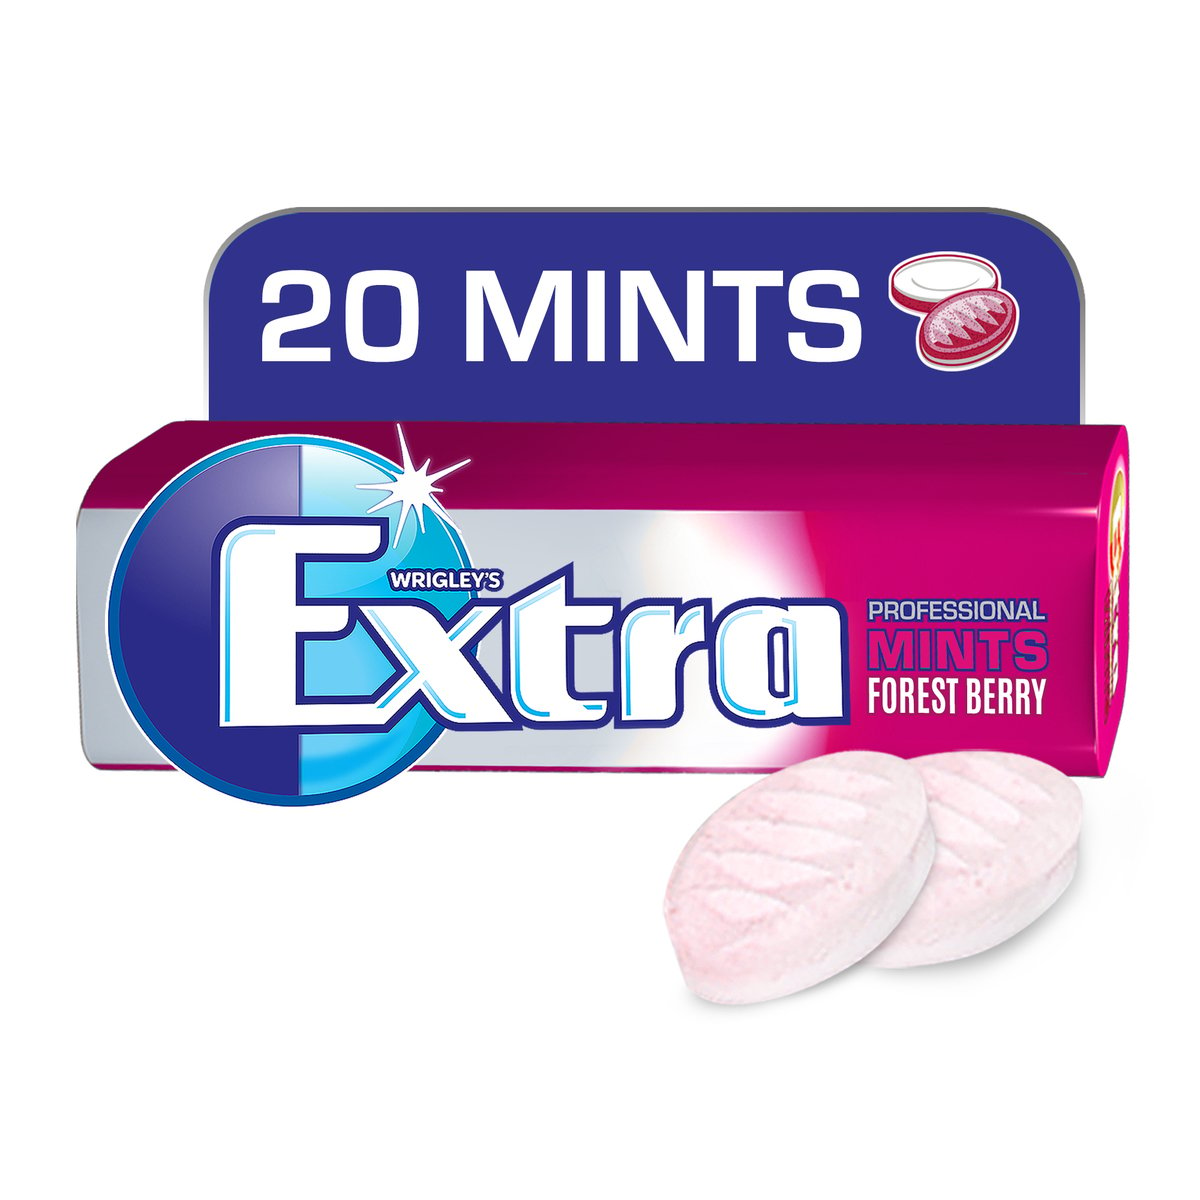 Wrigley's Extra Professional Mints Forest Berries Gum 20 pcs